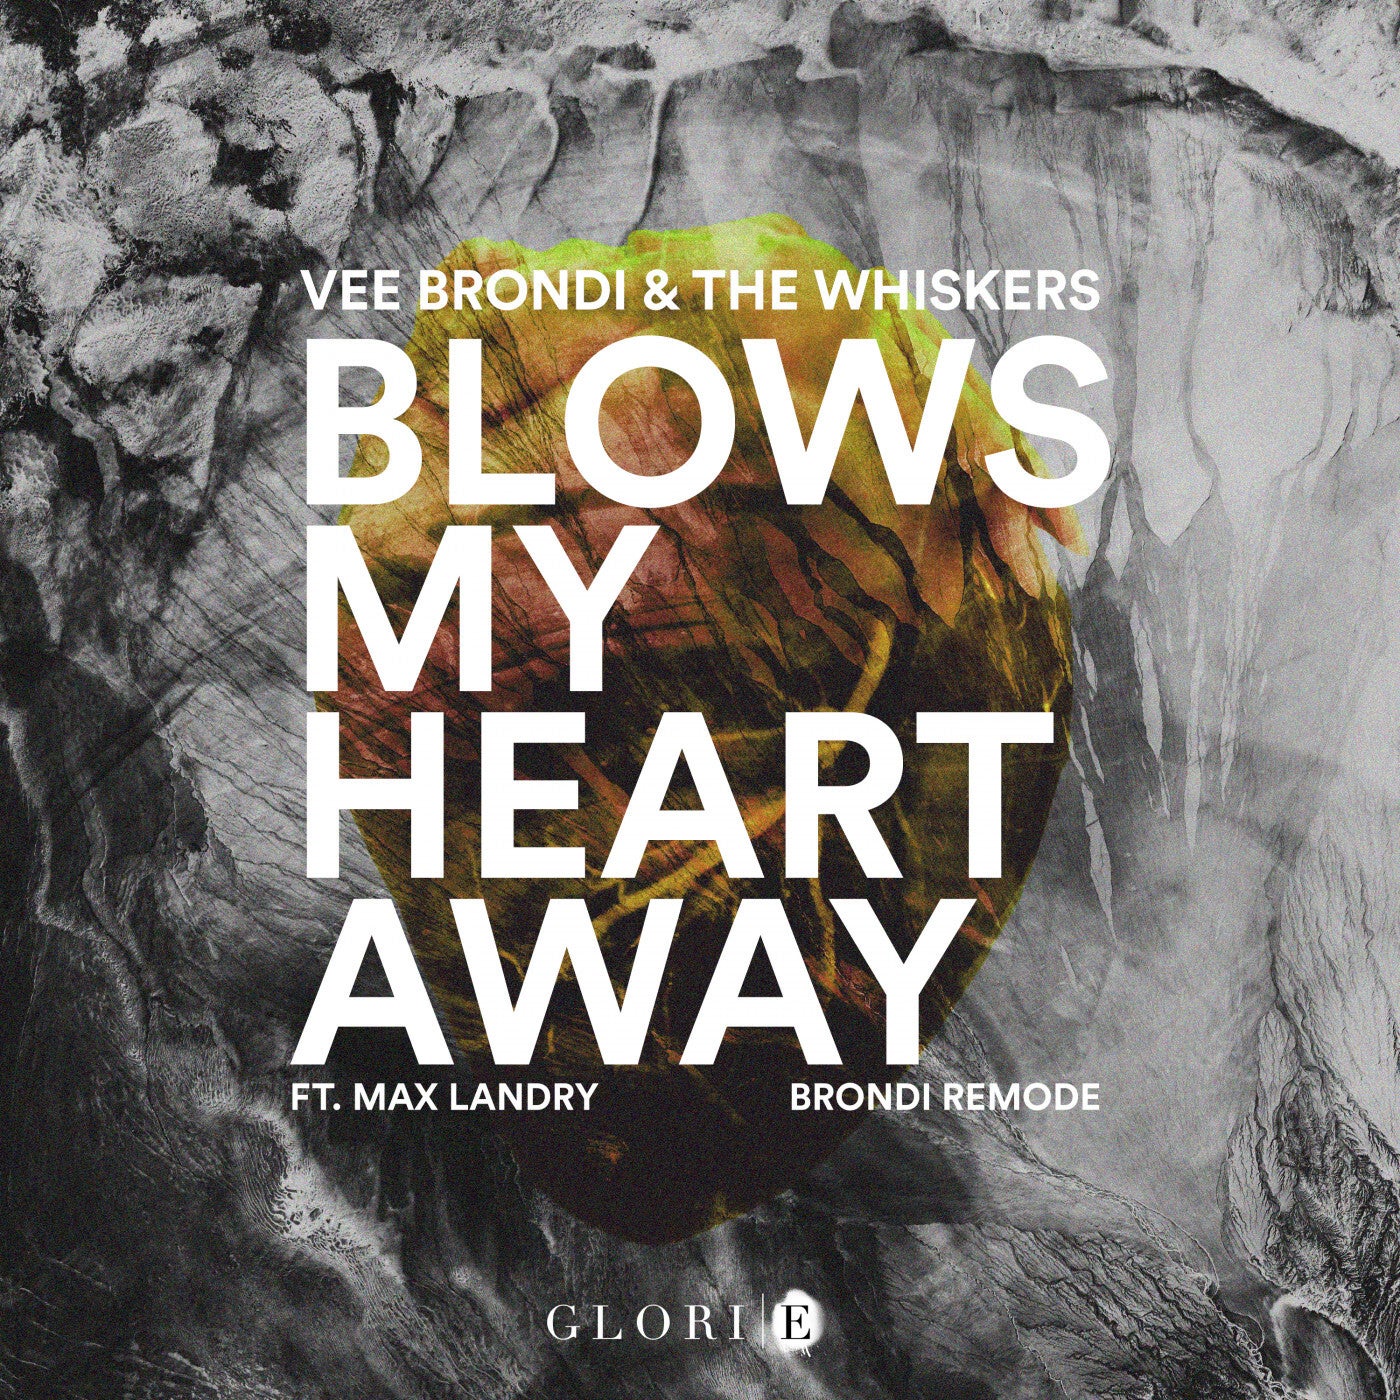 Vee Brondi & The Whiskers feat. Max Landry - Blows My Heart Away (Brondi Extended Remode)